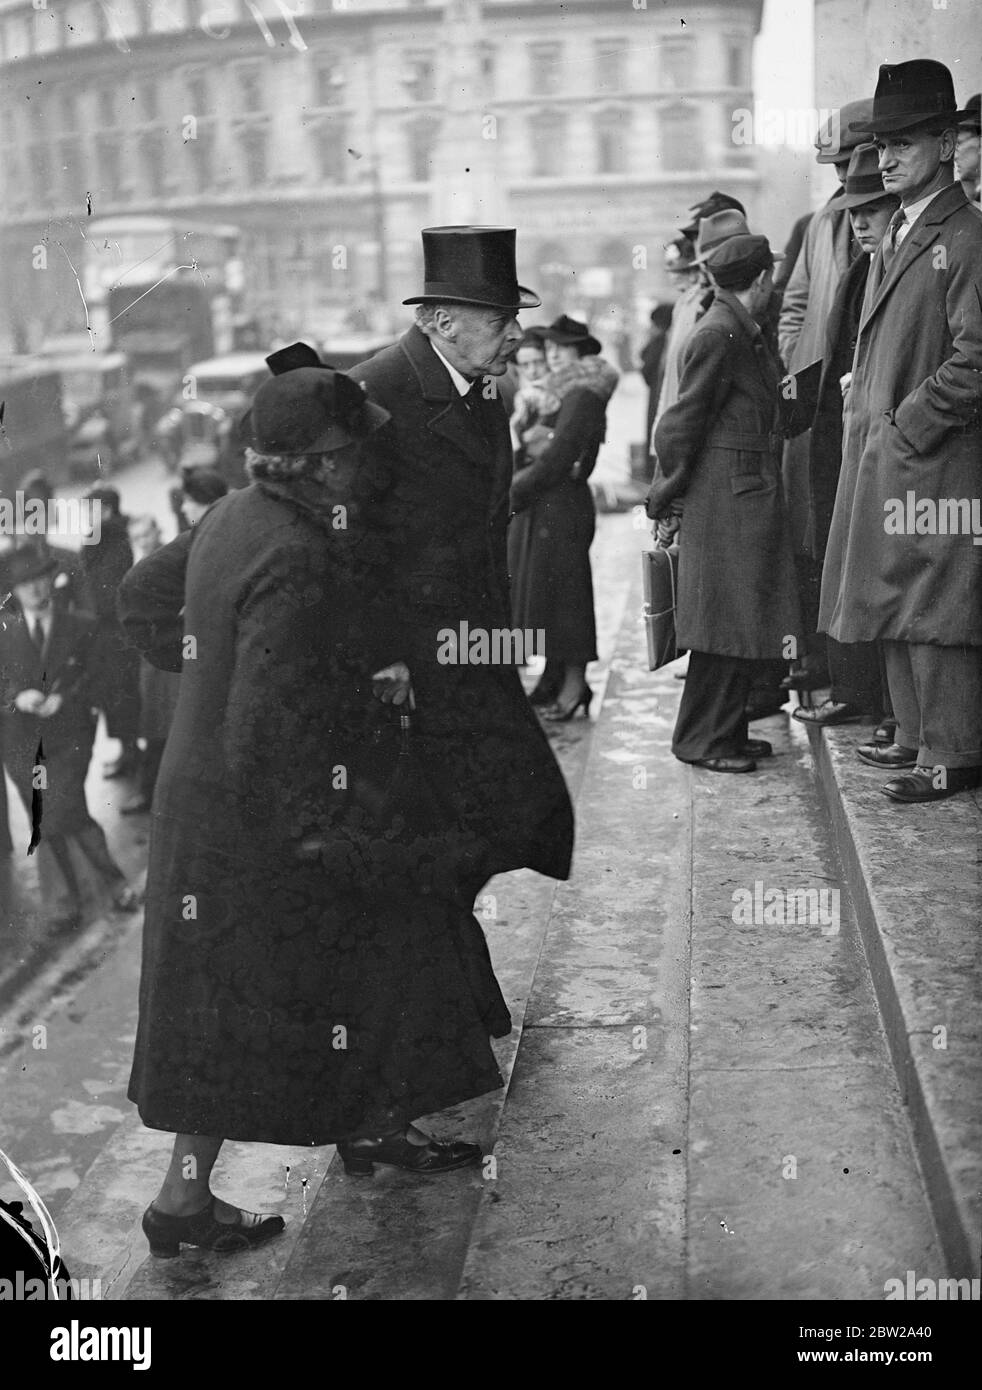 Sir Reginald Bowe at Memorial service for Lillian Baylis. Leading figures of the theatrical world, attended the memorial service for Miss Lillian Baylis of the Old Vic at St Martins in the fields church, Trafalgar Square. Photo shows, Miss Flora Robson, the actress (right) and Miss Jill Esmond, actress, arriving for the service. 1 December 1937 Stock Photo